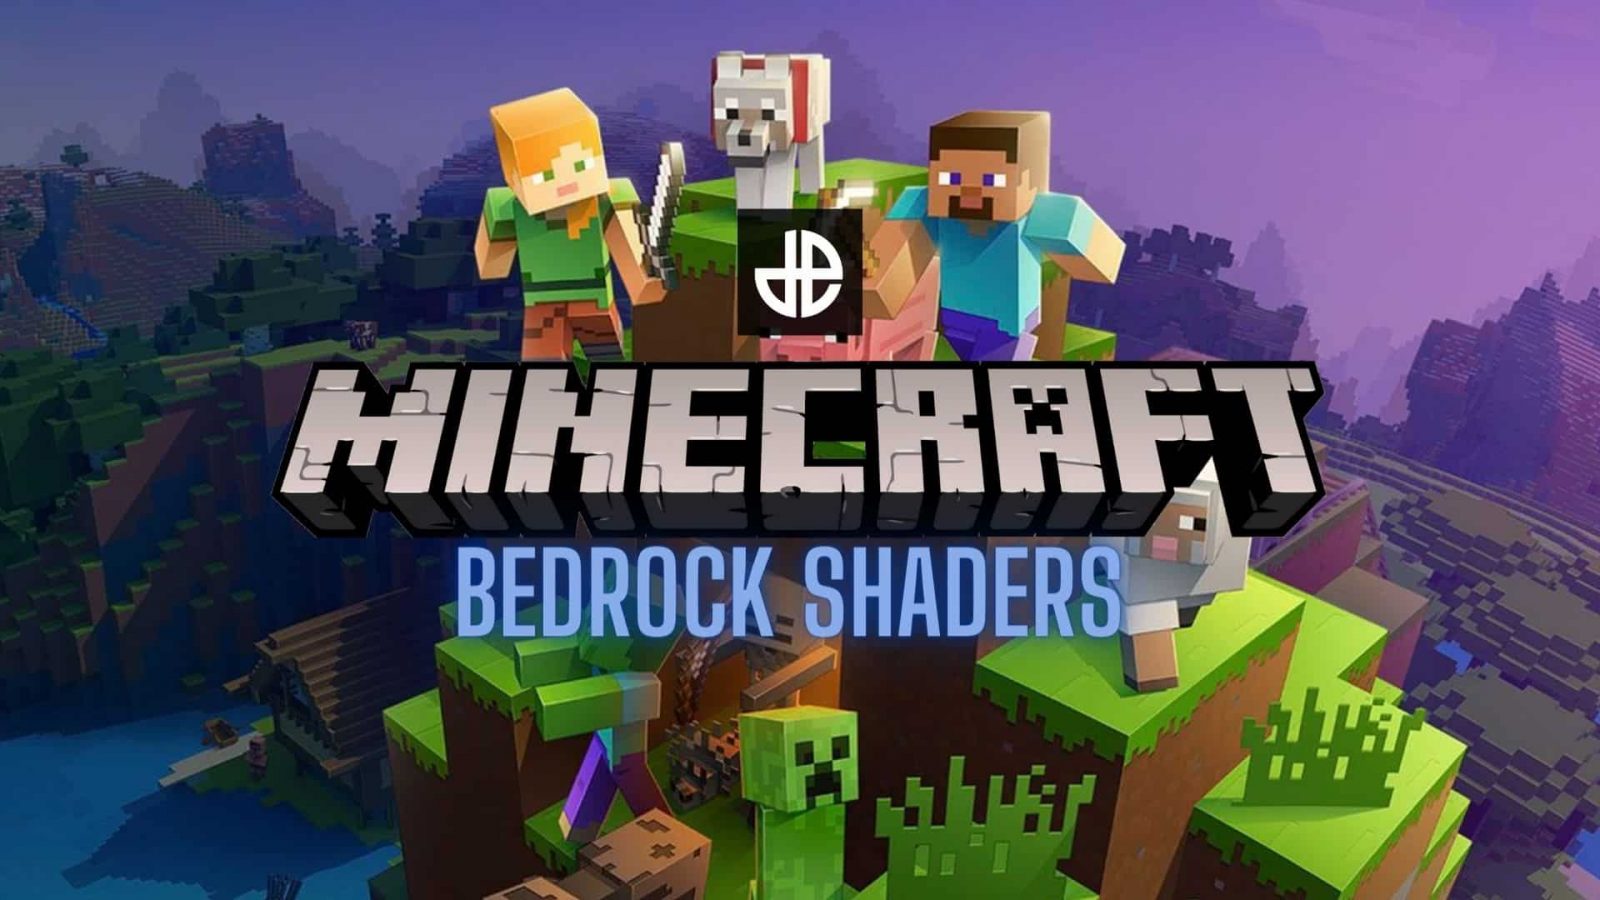 Can you download mods in minecraft bedrock